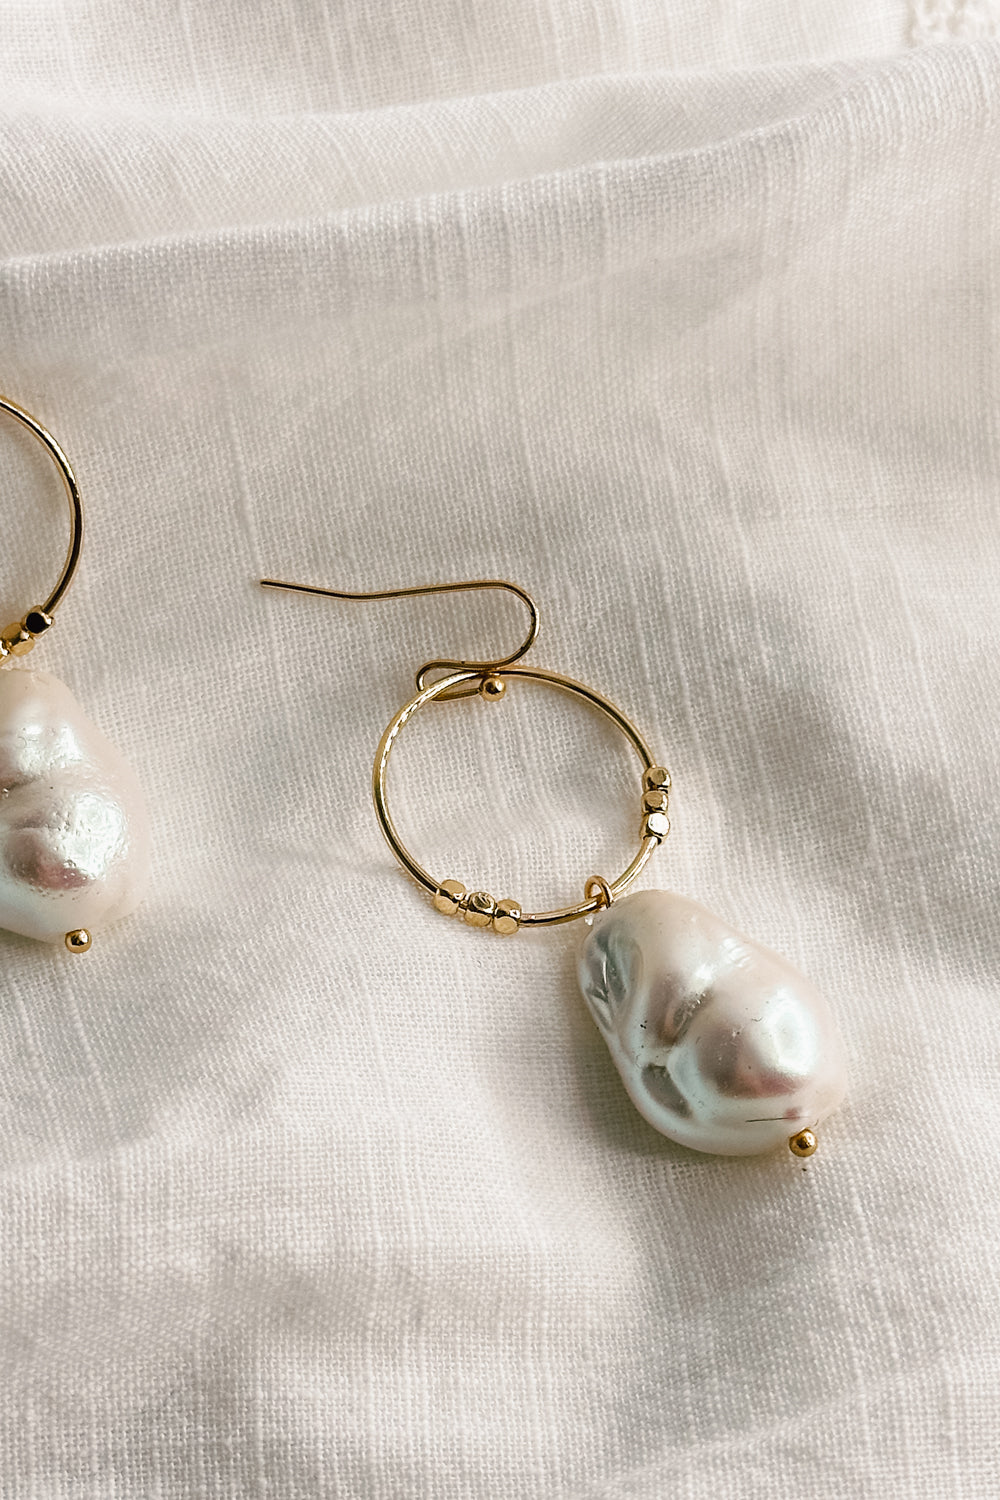 Close up view of the Shelby Pearl and Gold Mini Hoop Dangle Earring which features small gold hoop with a pearl medallion dangle attached and a hook back closure